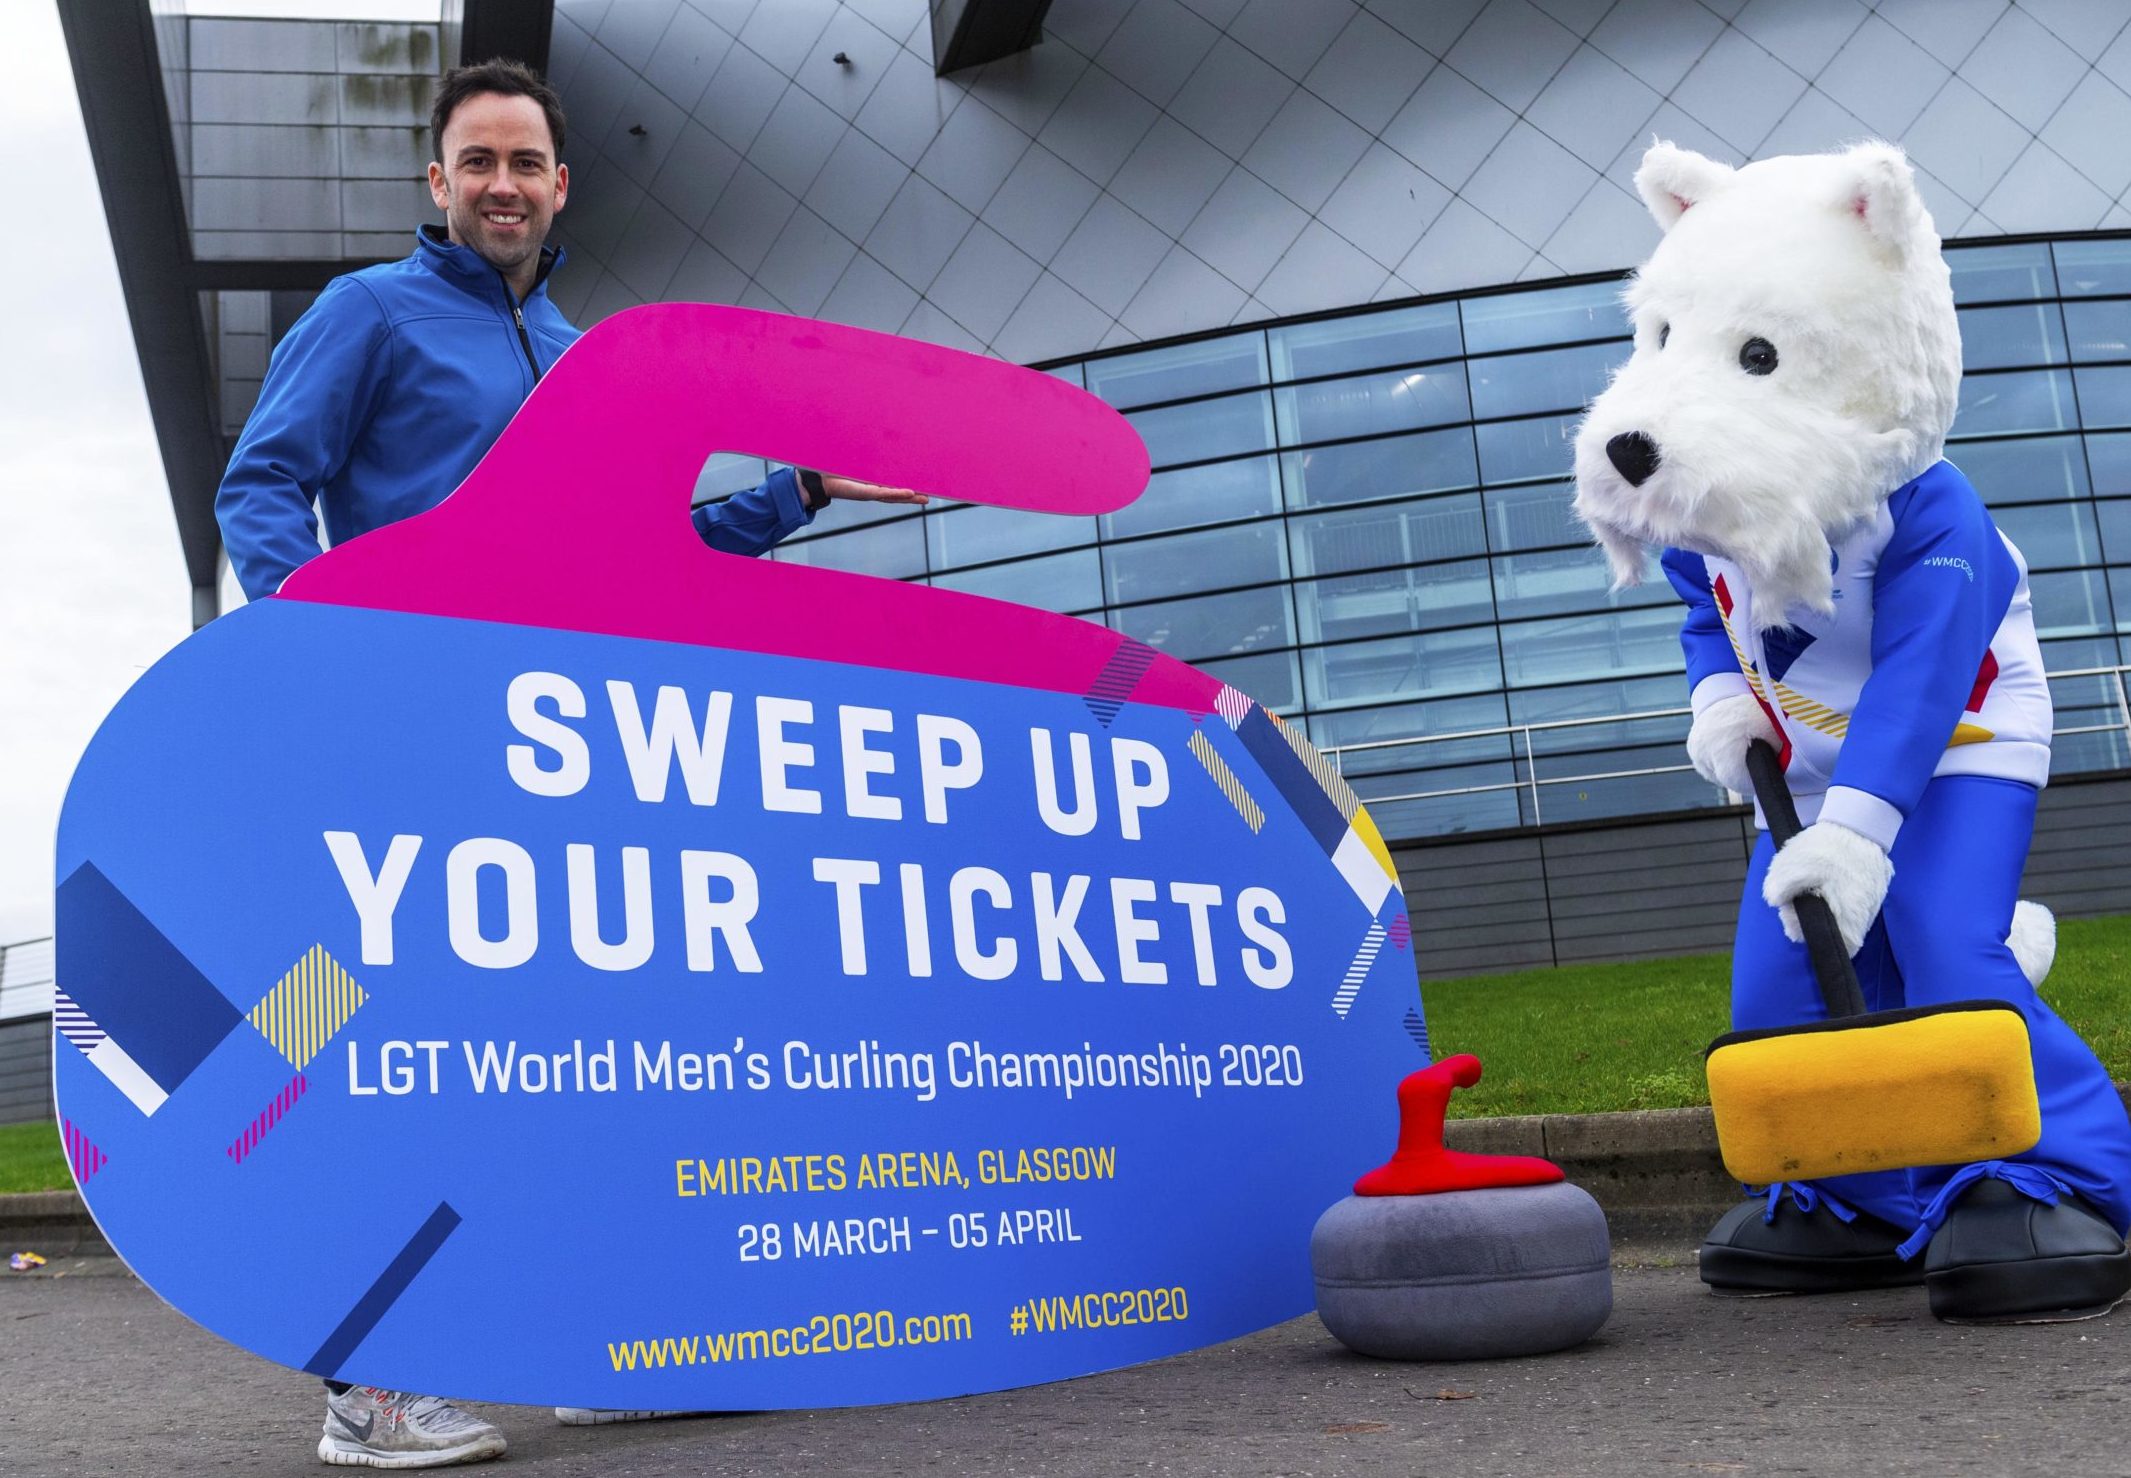 British Curling National Coach David Murdoch and Sweep the mascot at the Emirates Arena.